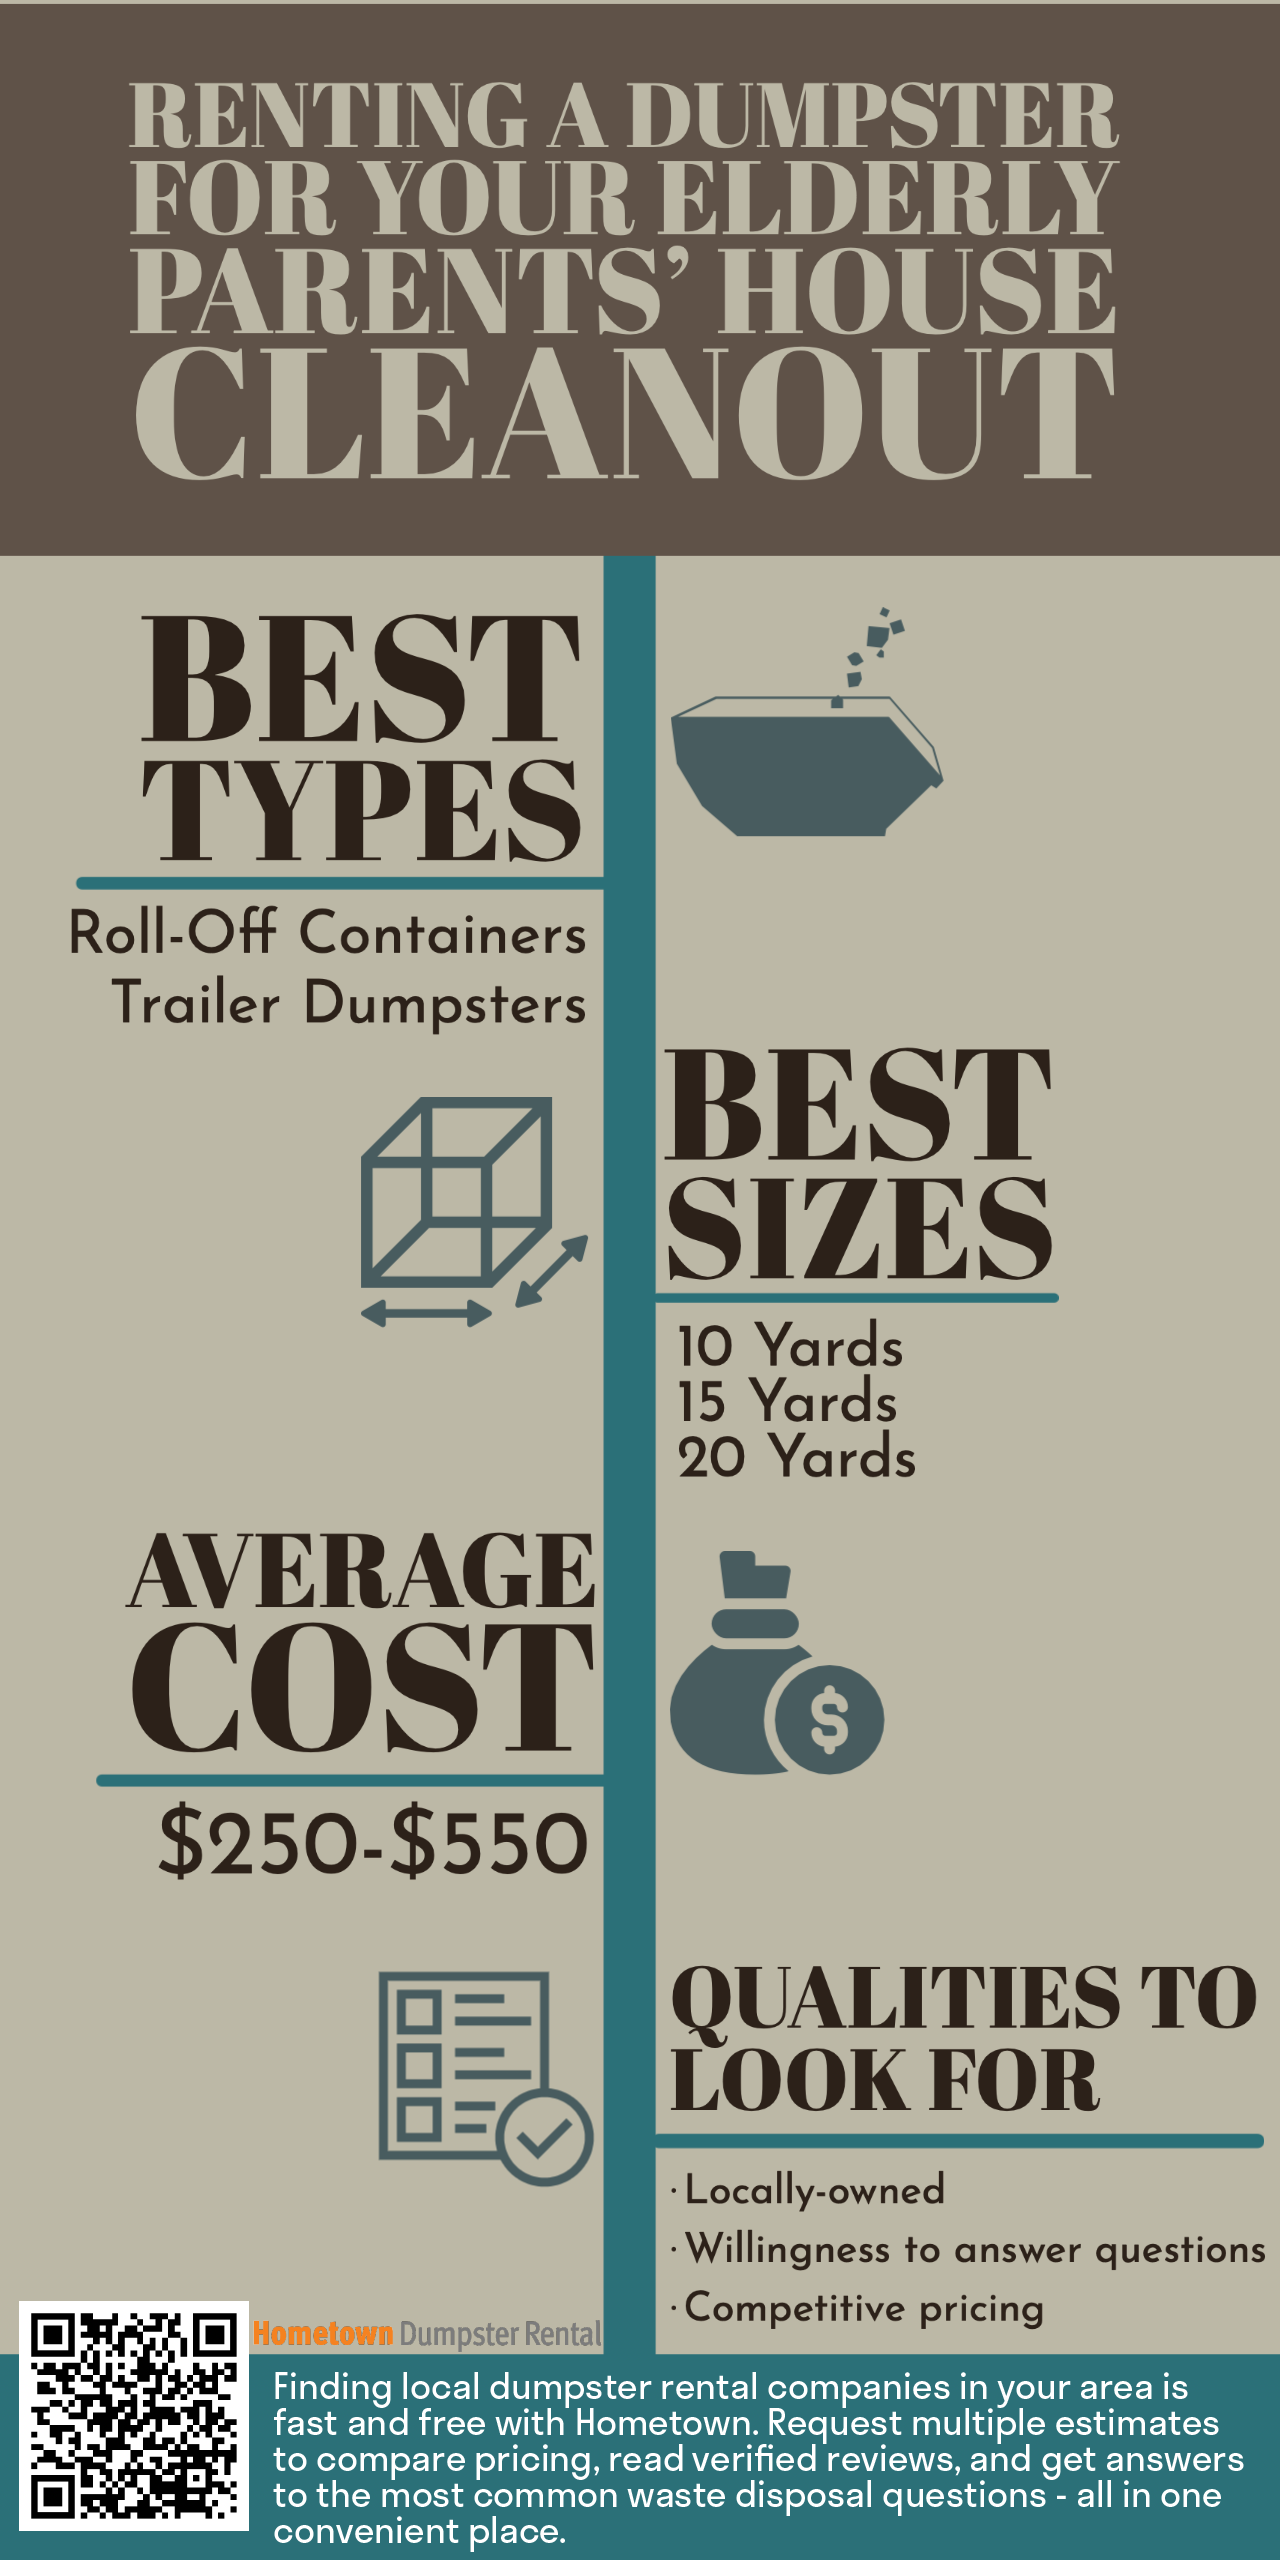 Renting a Dumpster for Your Elderly Parents’ House Cleanout Infographic